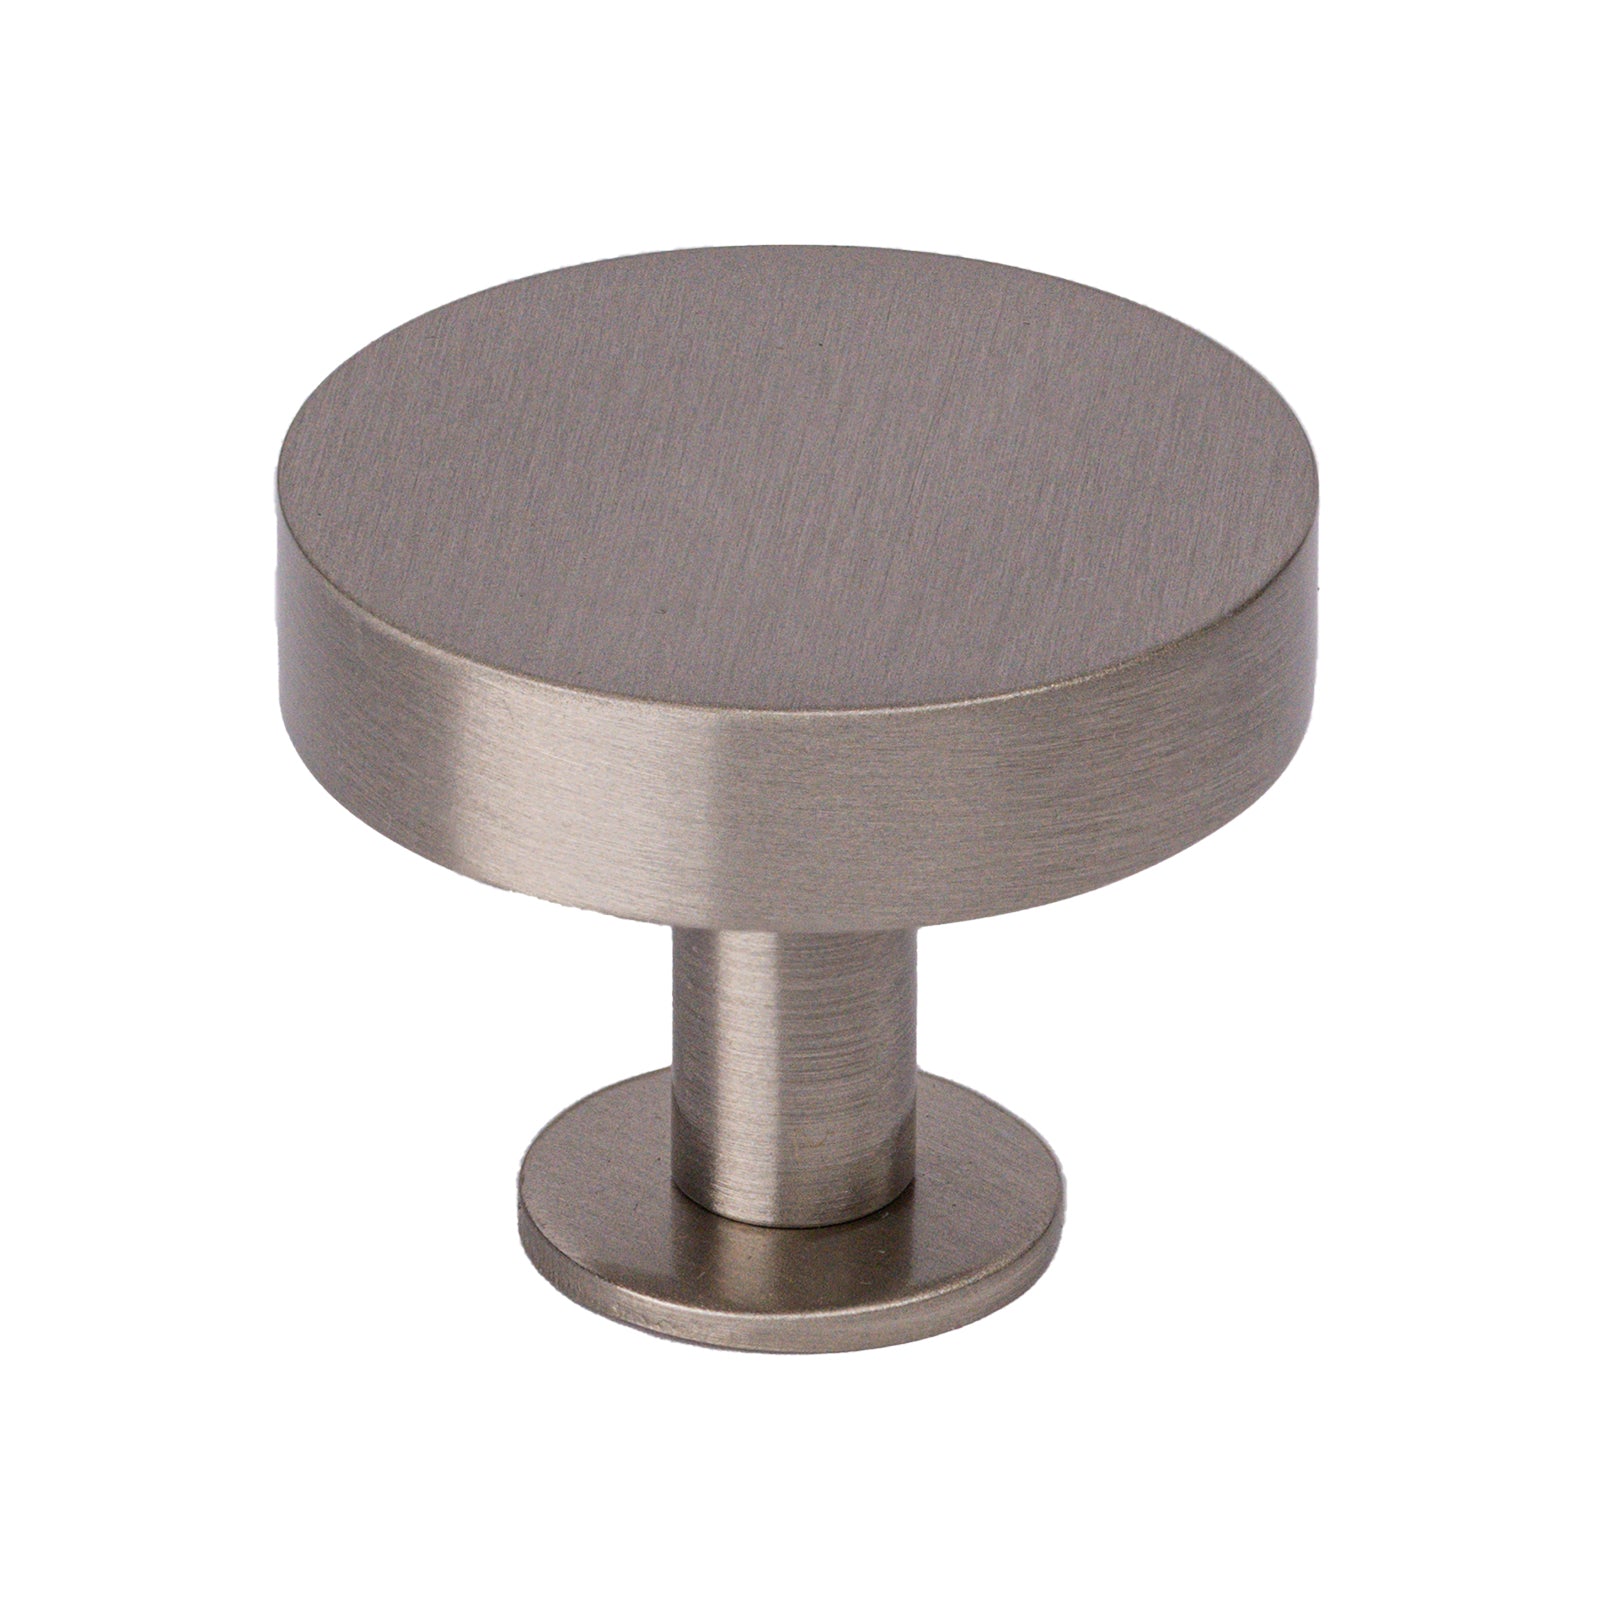 satin nickel cabinet knobs on rose, kitchen cupboard knobs with roseplate